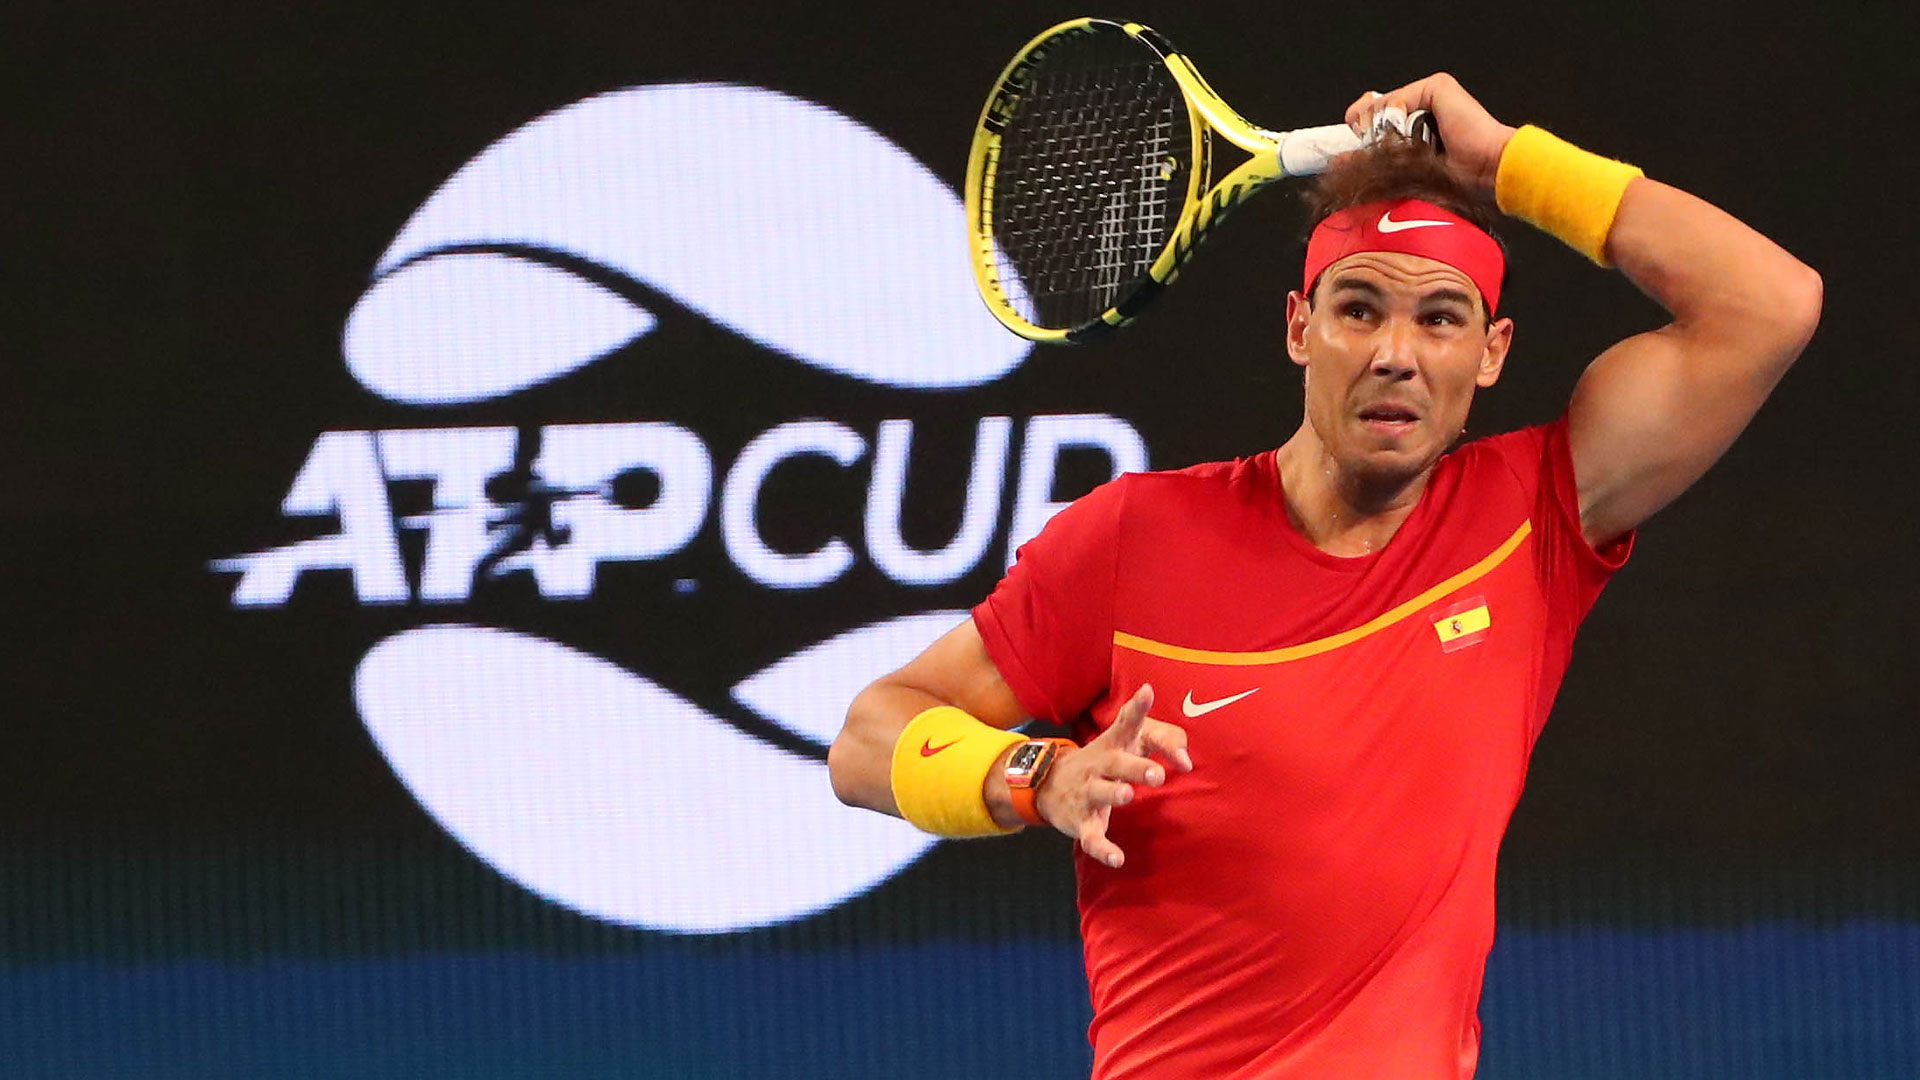 Rafael Nadal confirms good form, leads Spain in ATP Cup